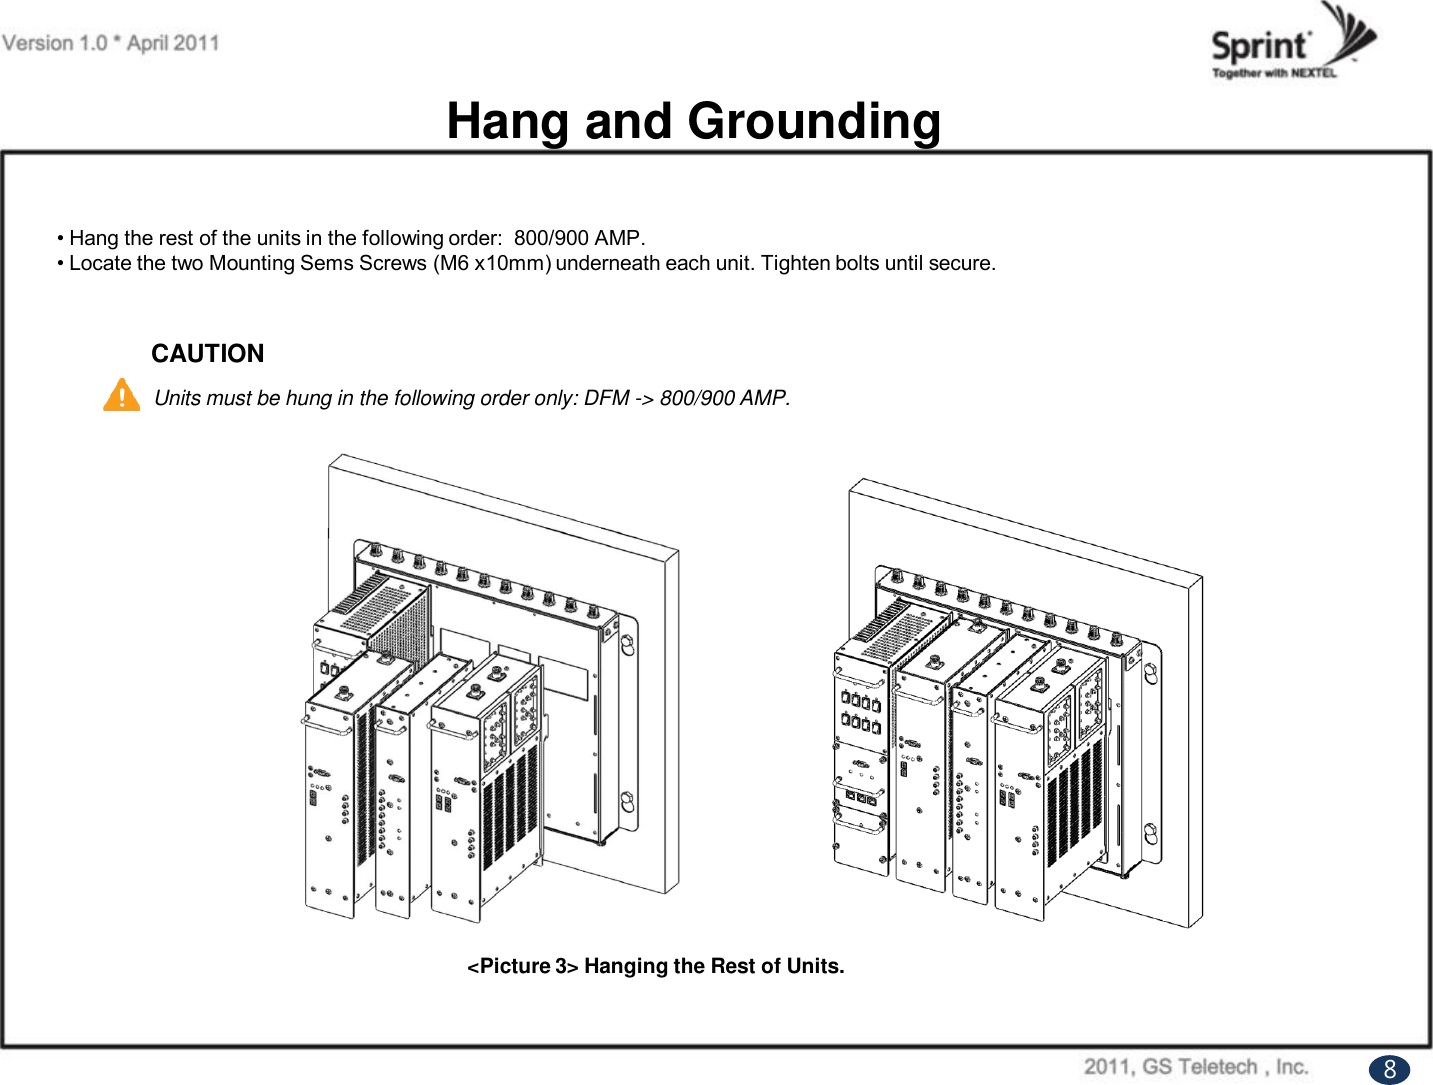 Hang and Grounding• Hang the rest of the units in the following order:  800/900 AMP.• Locate the two Mounting Sems Screws (M6 x10mm) underneath each unit. Tighten bolts until secure.&lt;Picture 3&gt; Hanging the Rest of Units. CAUTIONUnits must be hung in the following order only: DFM -&gt; 800/900 AMP. 8